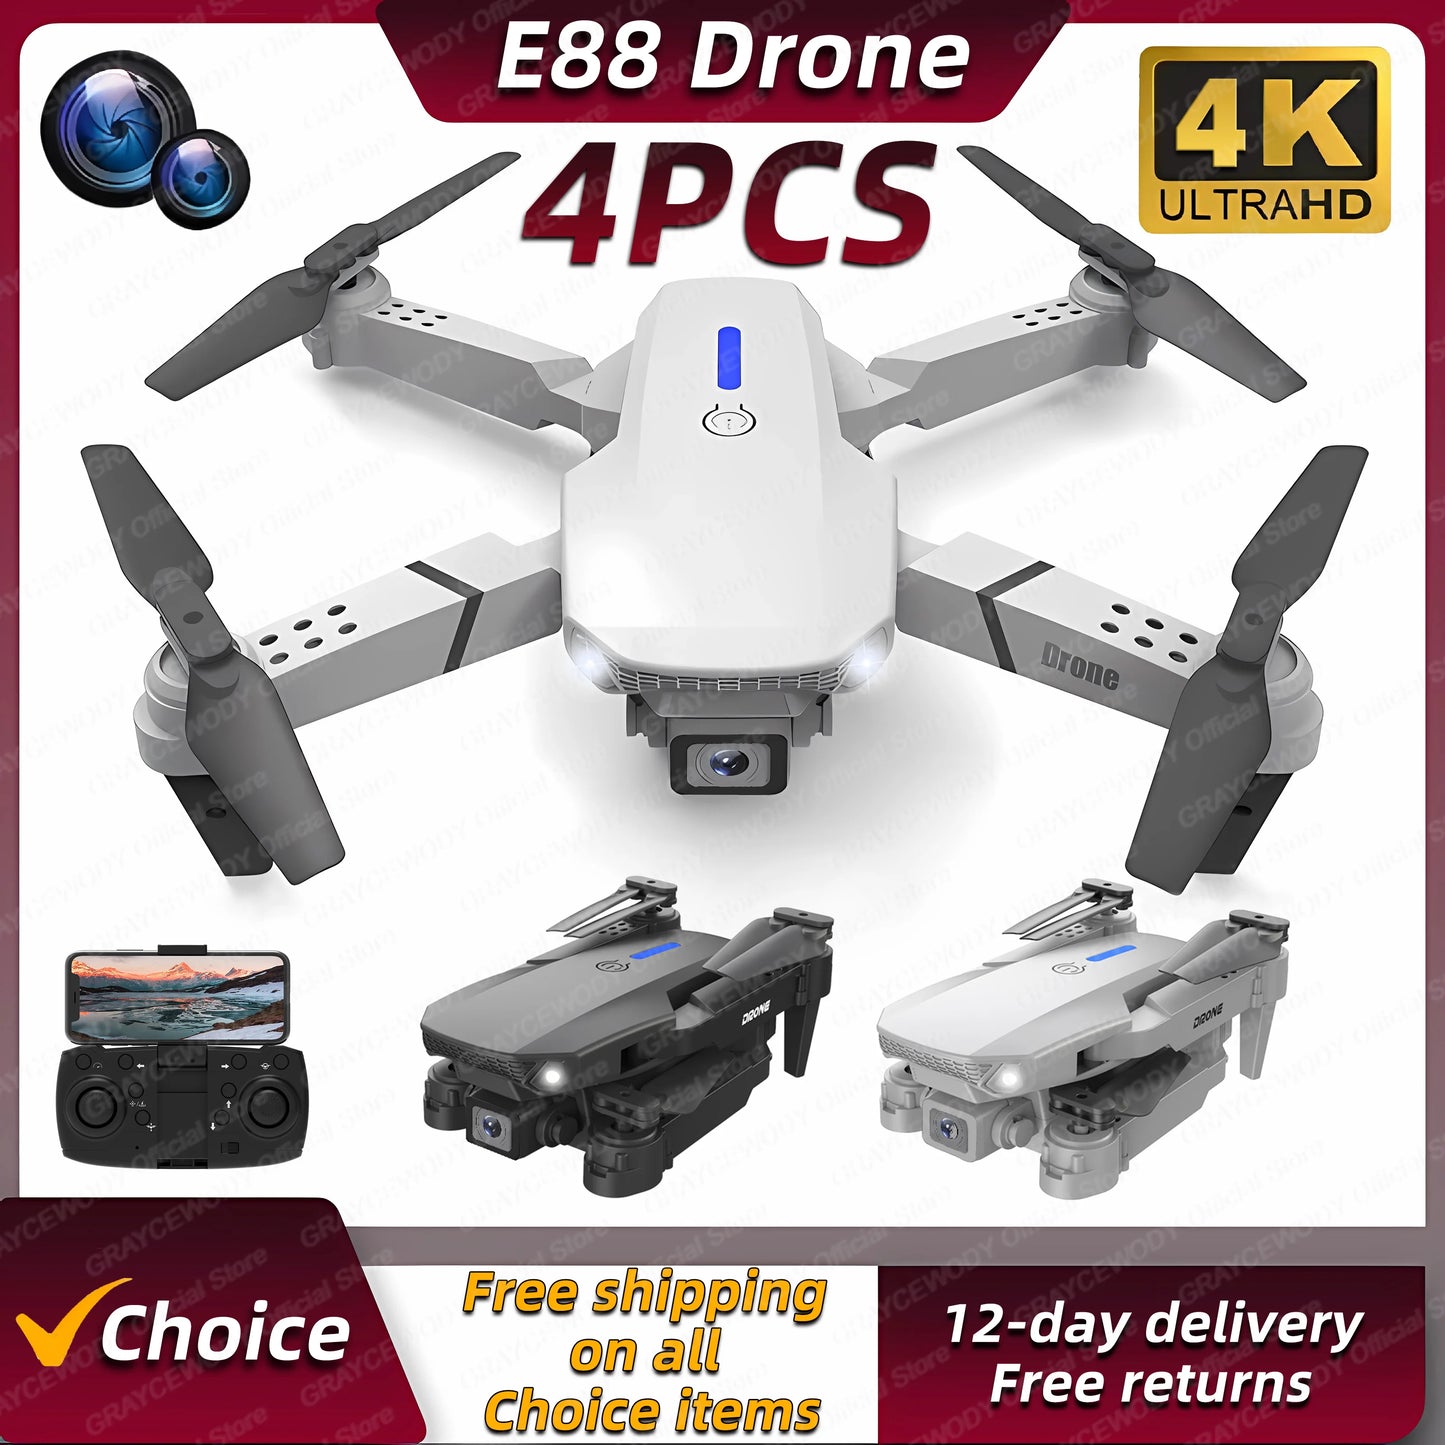 New E88Pro 4PCS RC Drone 4K Professinal With Wide Angle